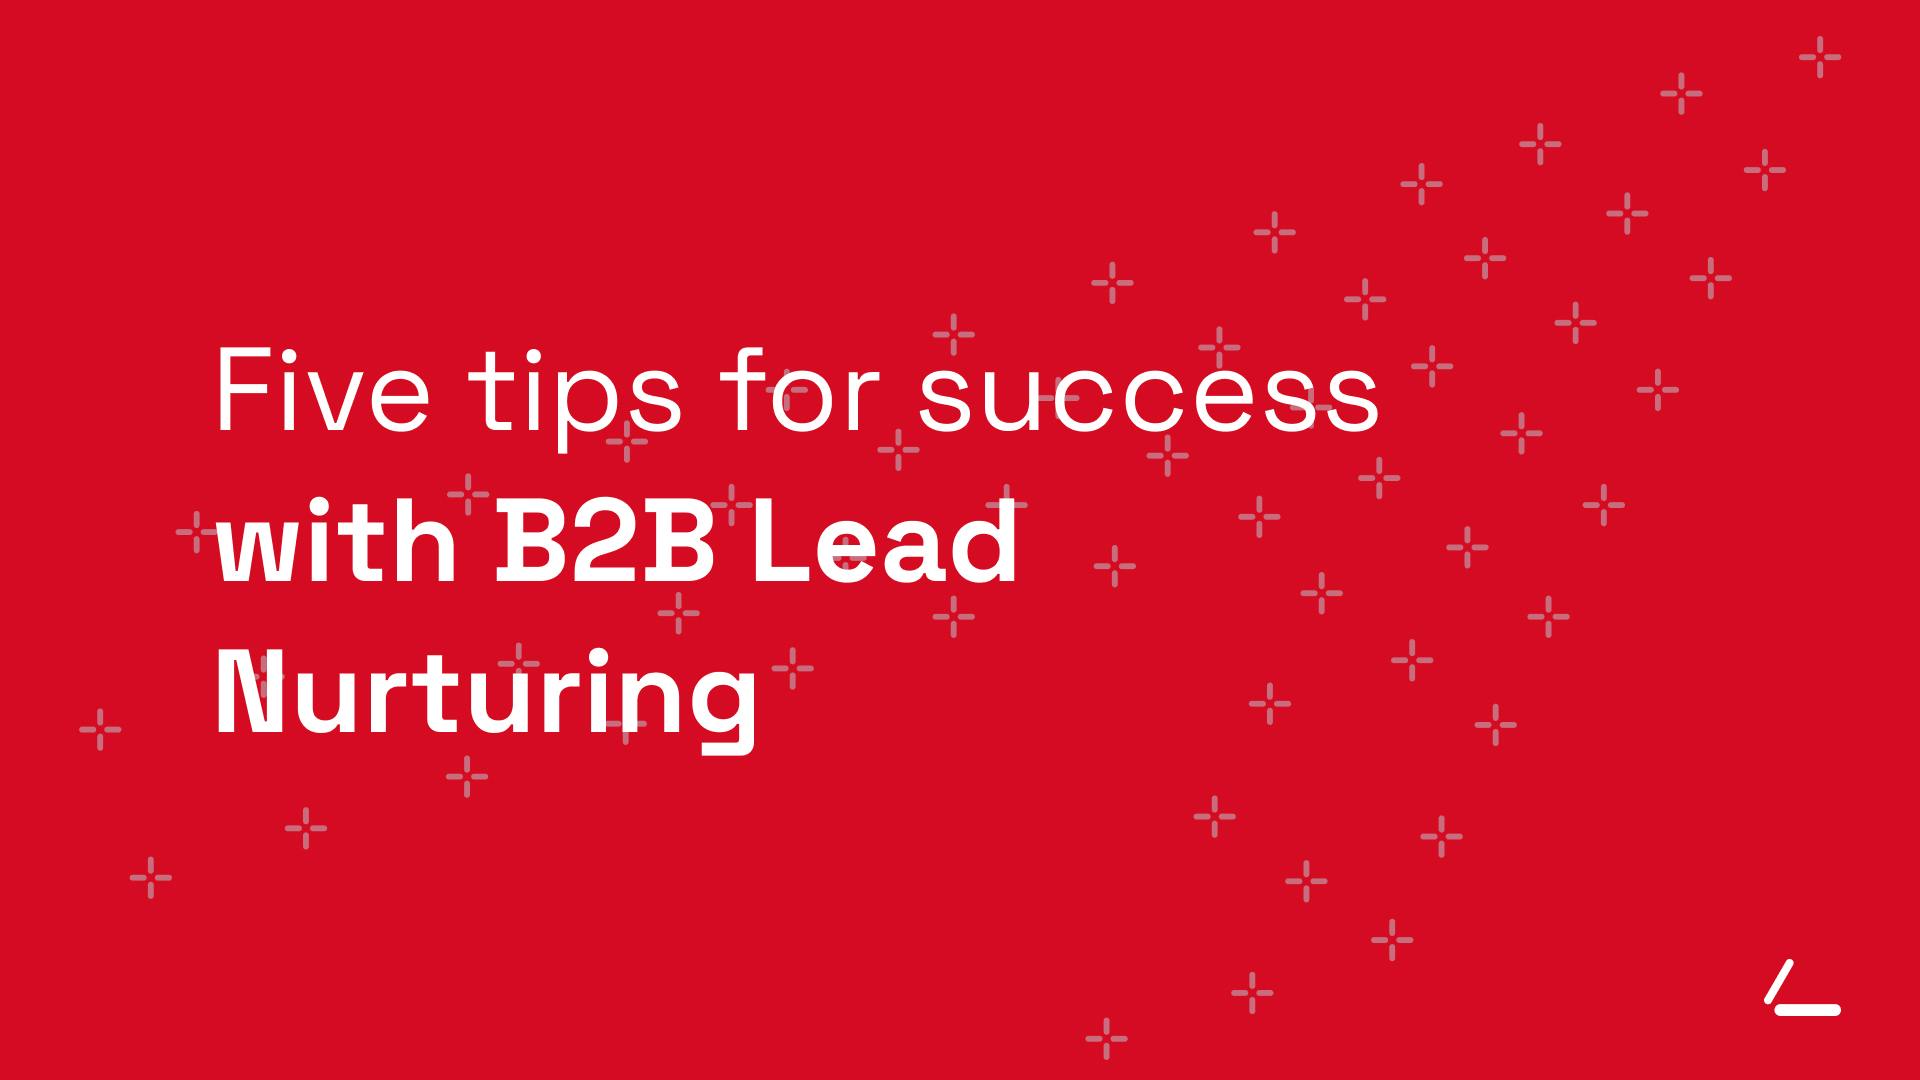 SEO Article Header - Red background with text about email marketing: five tips for success with B2B lead nurturing